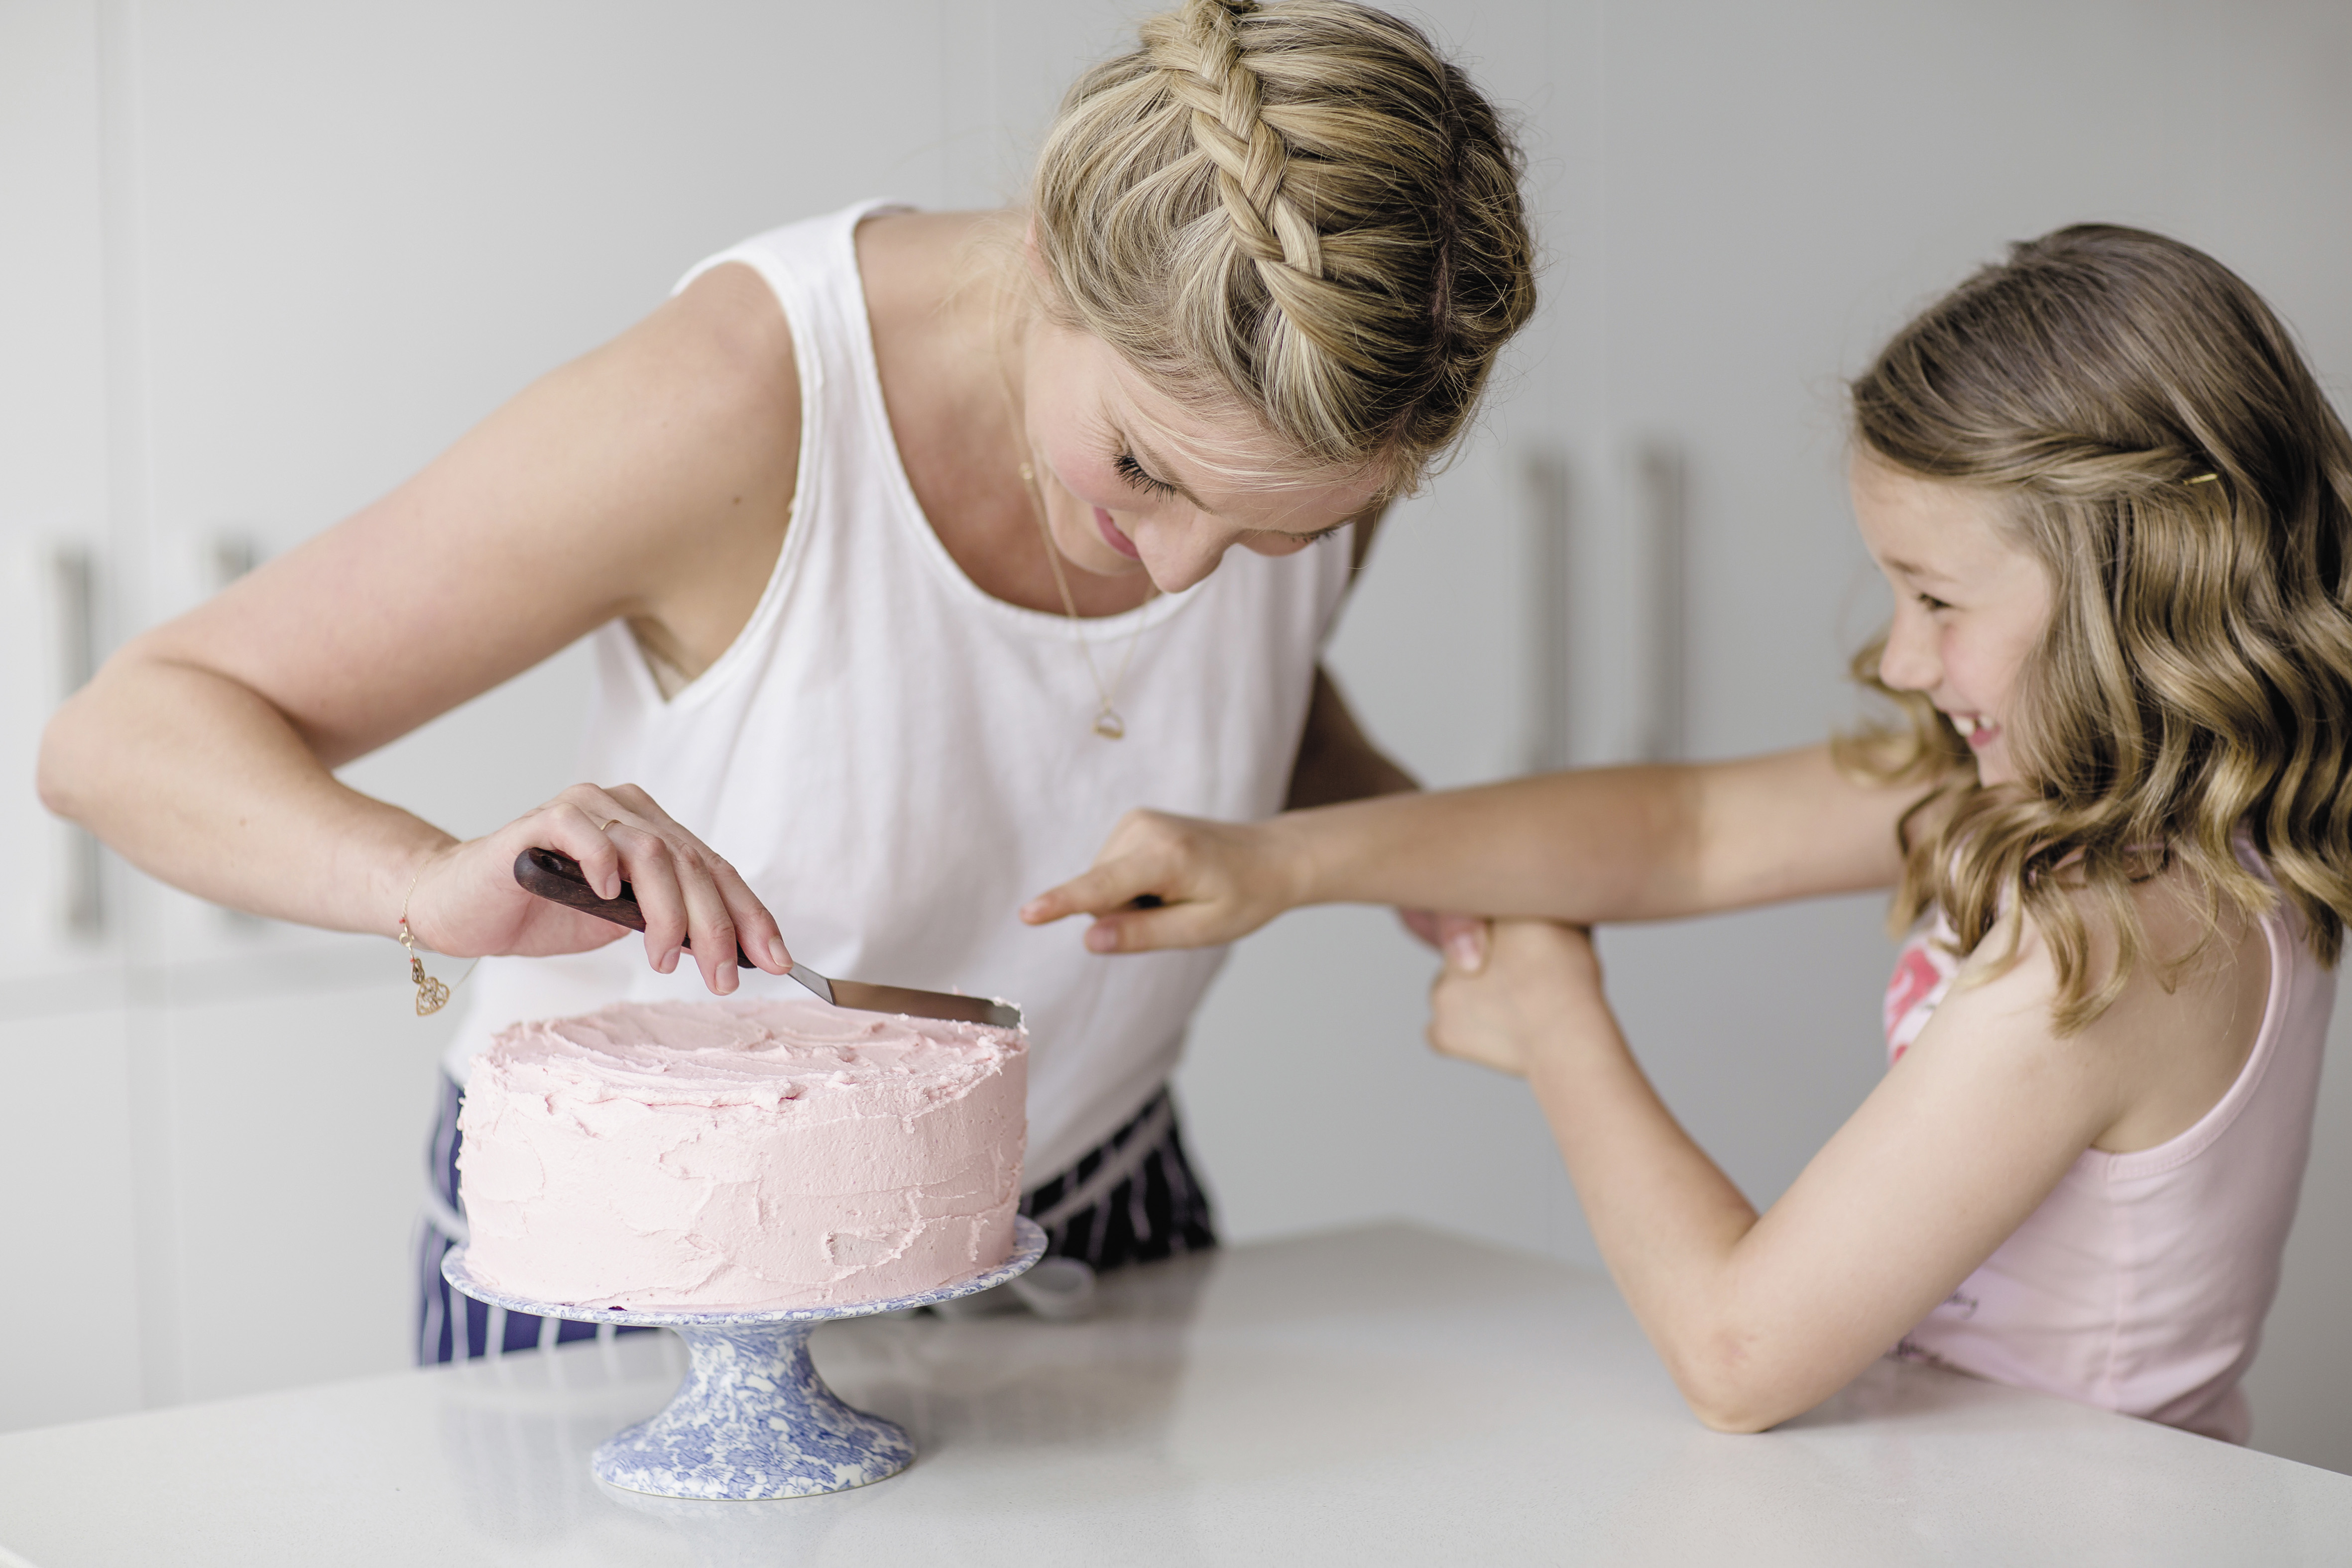 Mom & Daughter icing a cake